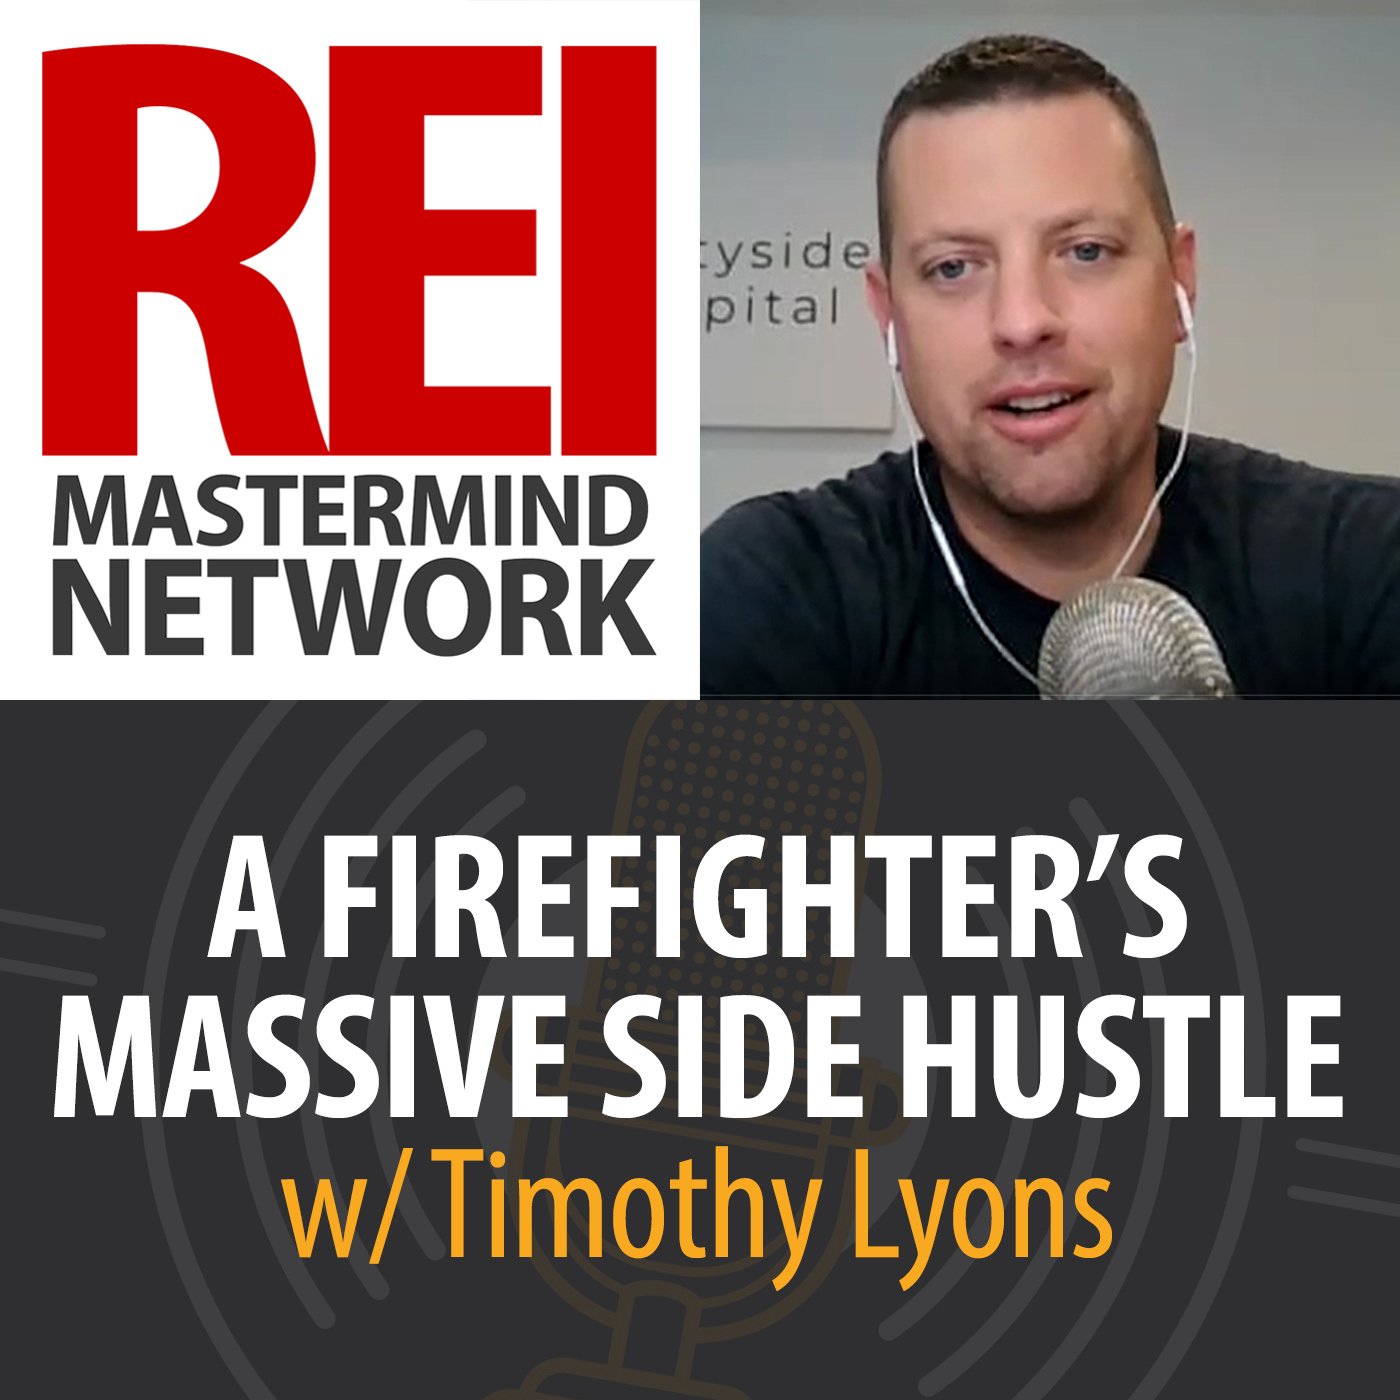 A Firefighter's Massive Side Hussle with Timothy Lyons Image